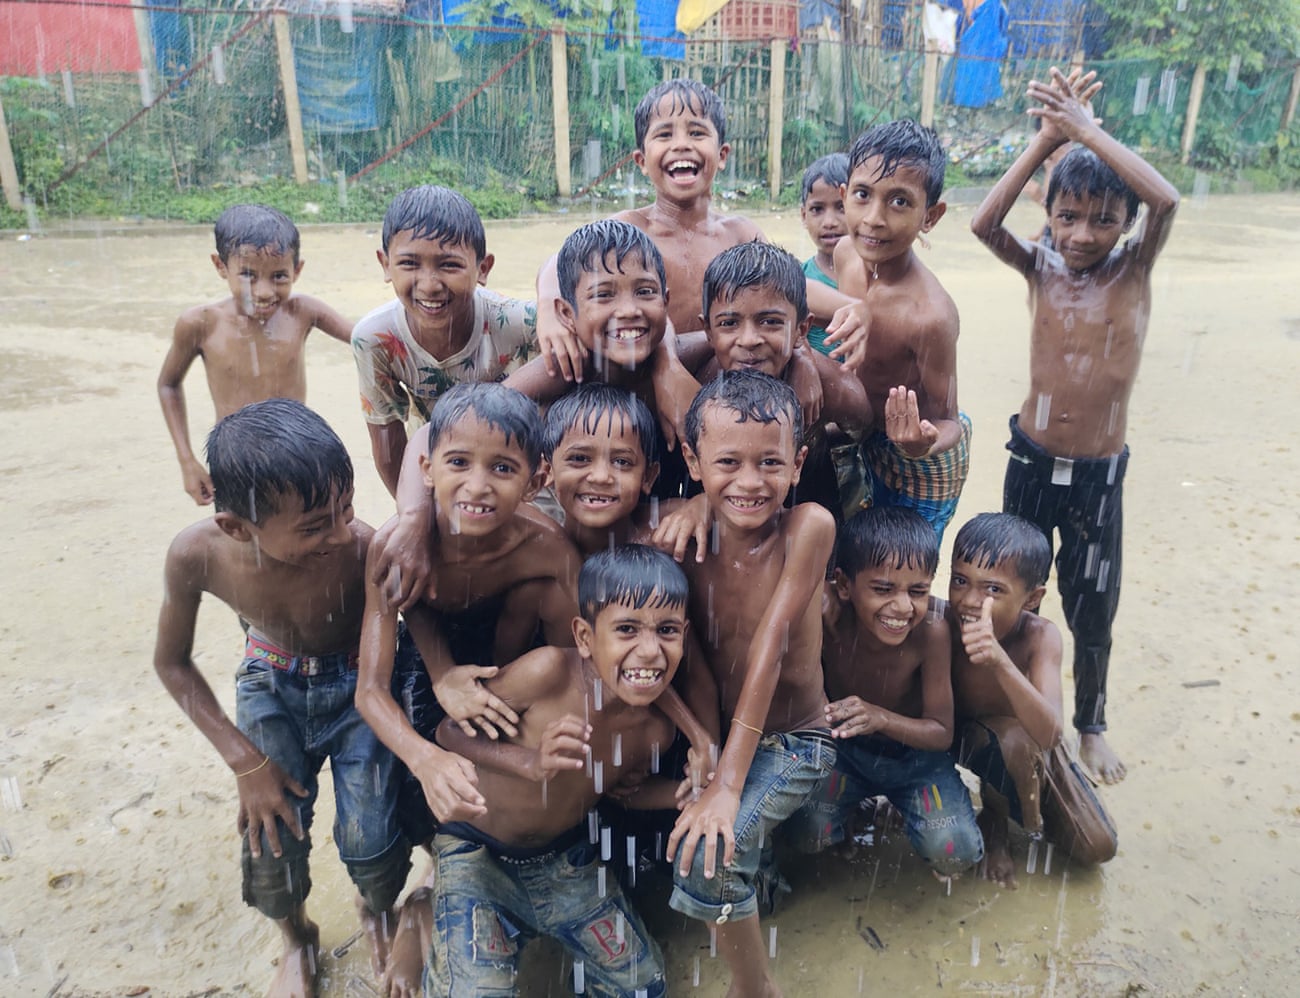 A group of Rohingya children play in the rain as it pours down outside their shelters in the refugee camps of Cox's Bazar, Bangladesh.